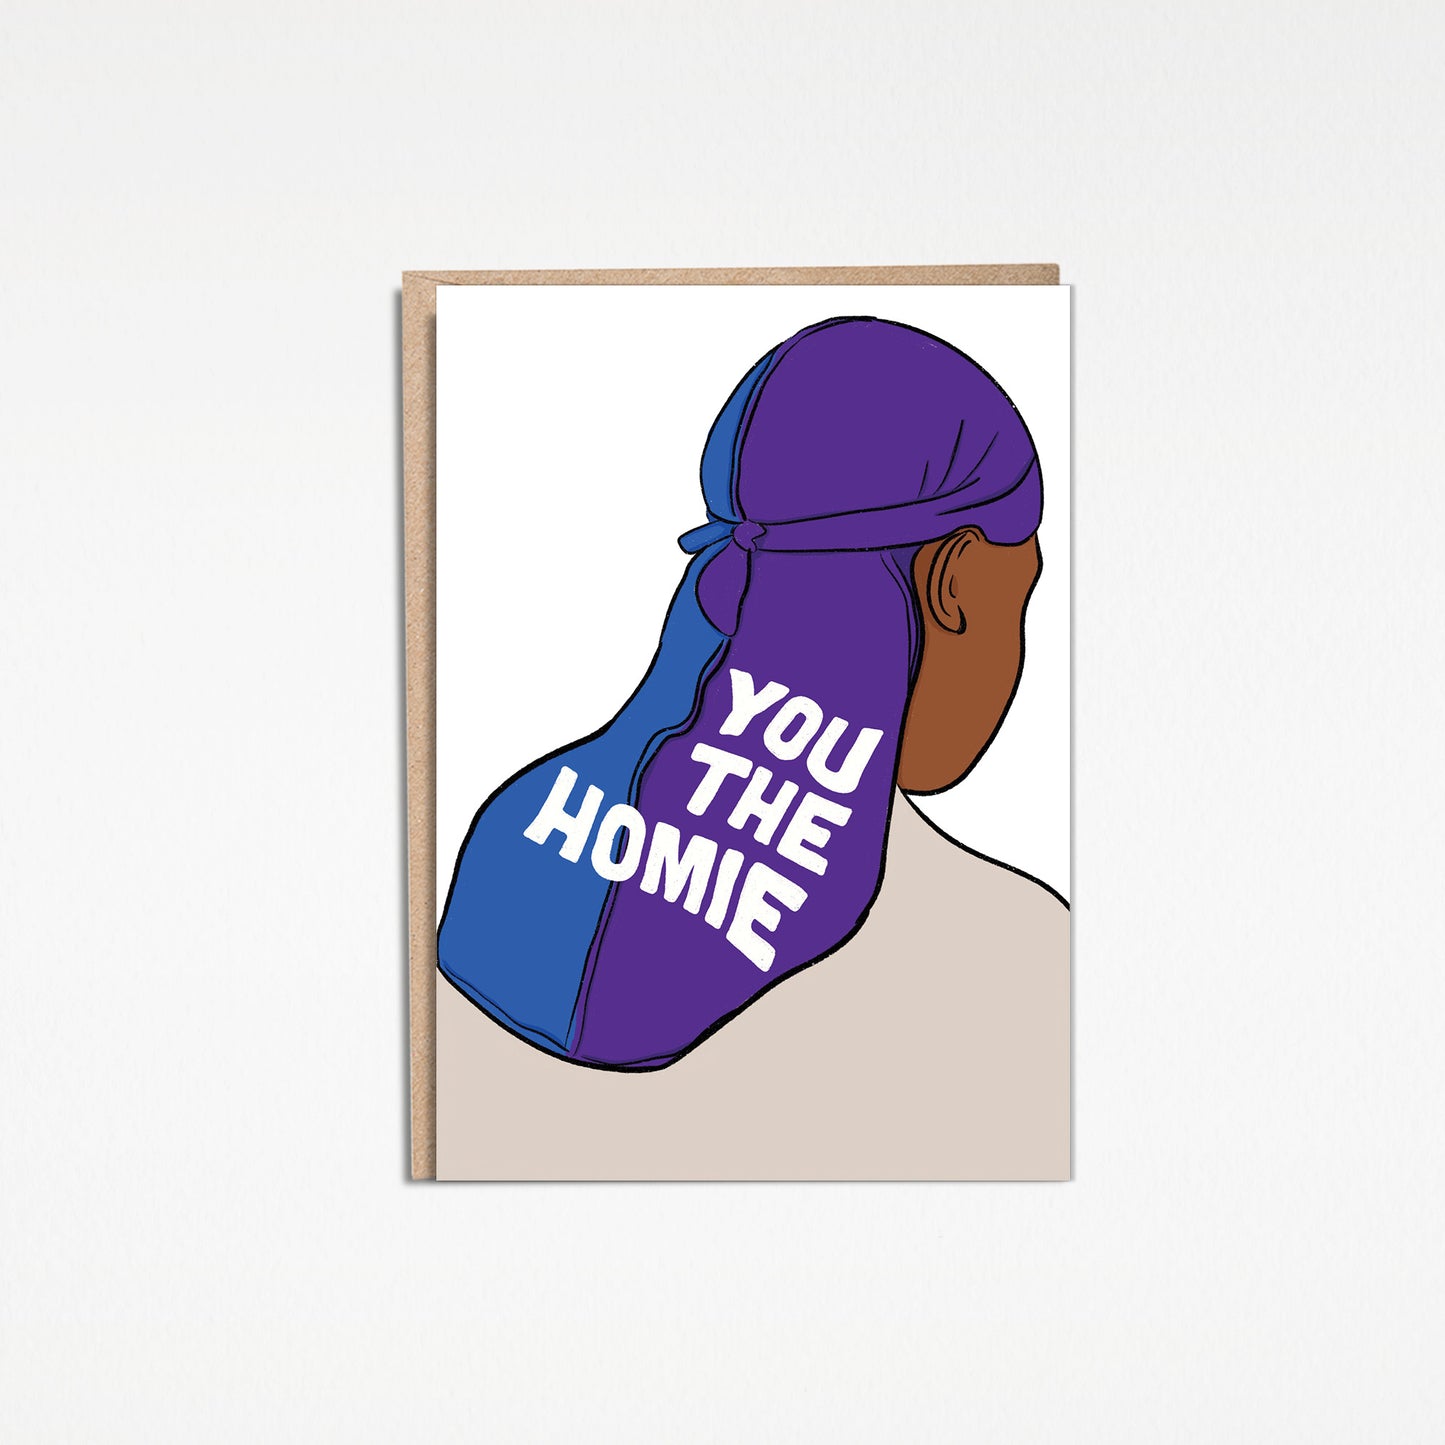 You The Homie 5x7” greeting card from Goods Made By Digitrillnana, Ashley Fletcher. Black Woman Owned. Perfect card for friendship, Black men, LGBTQIA.